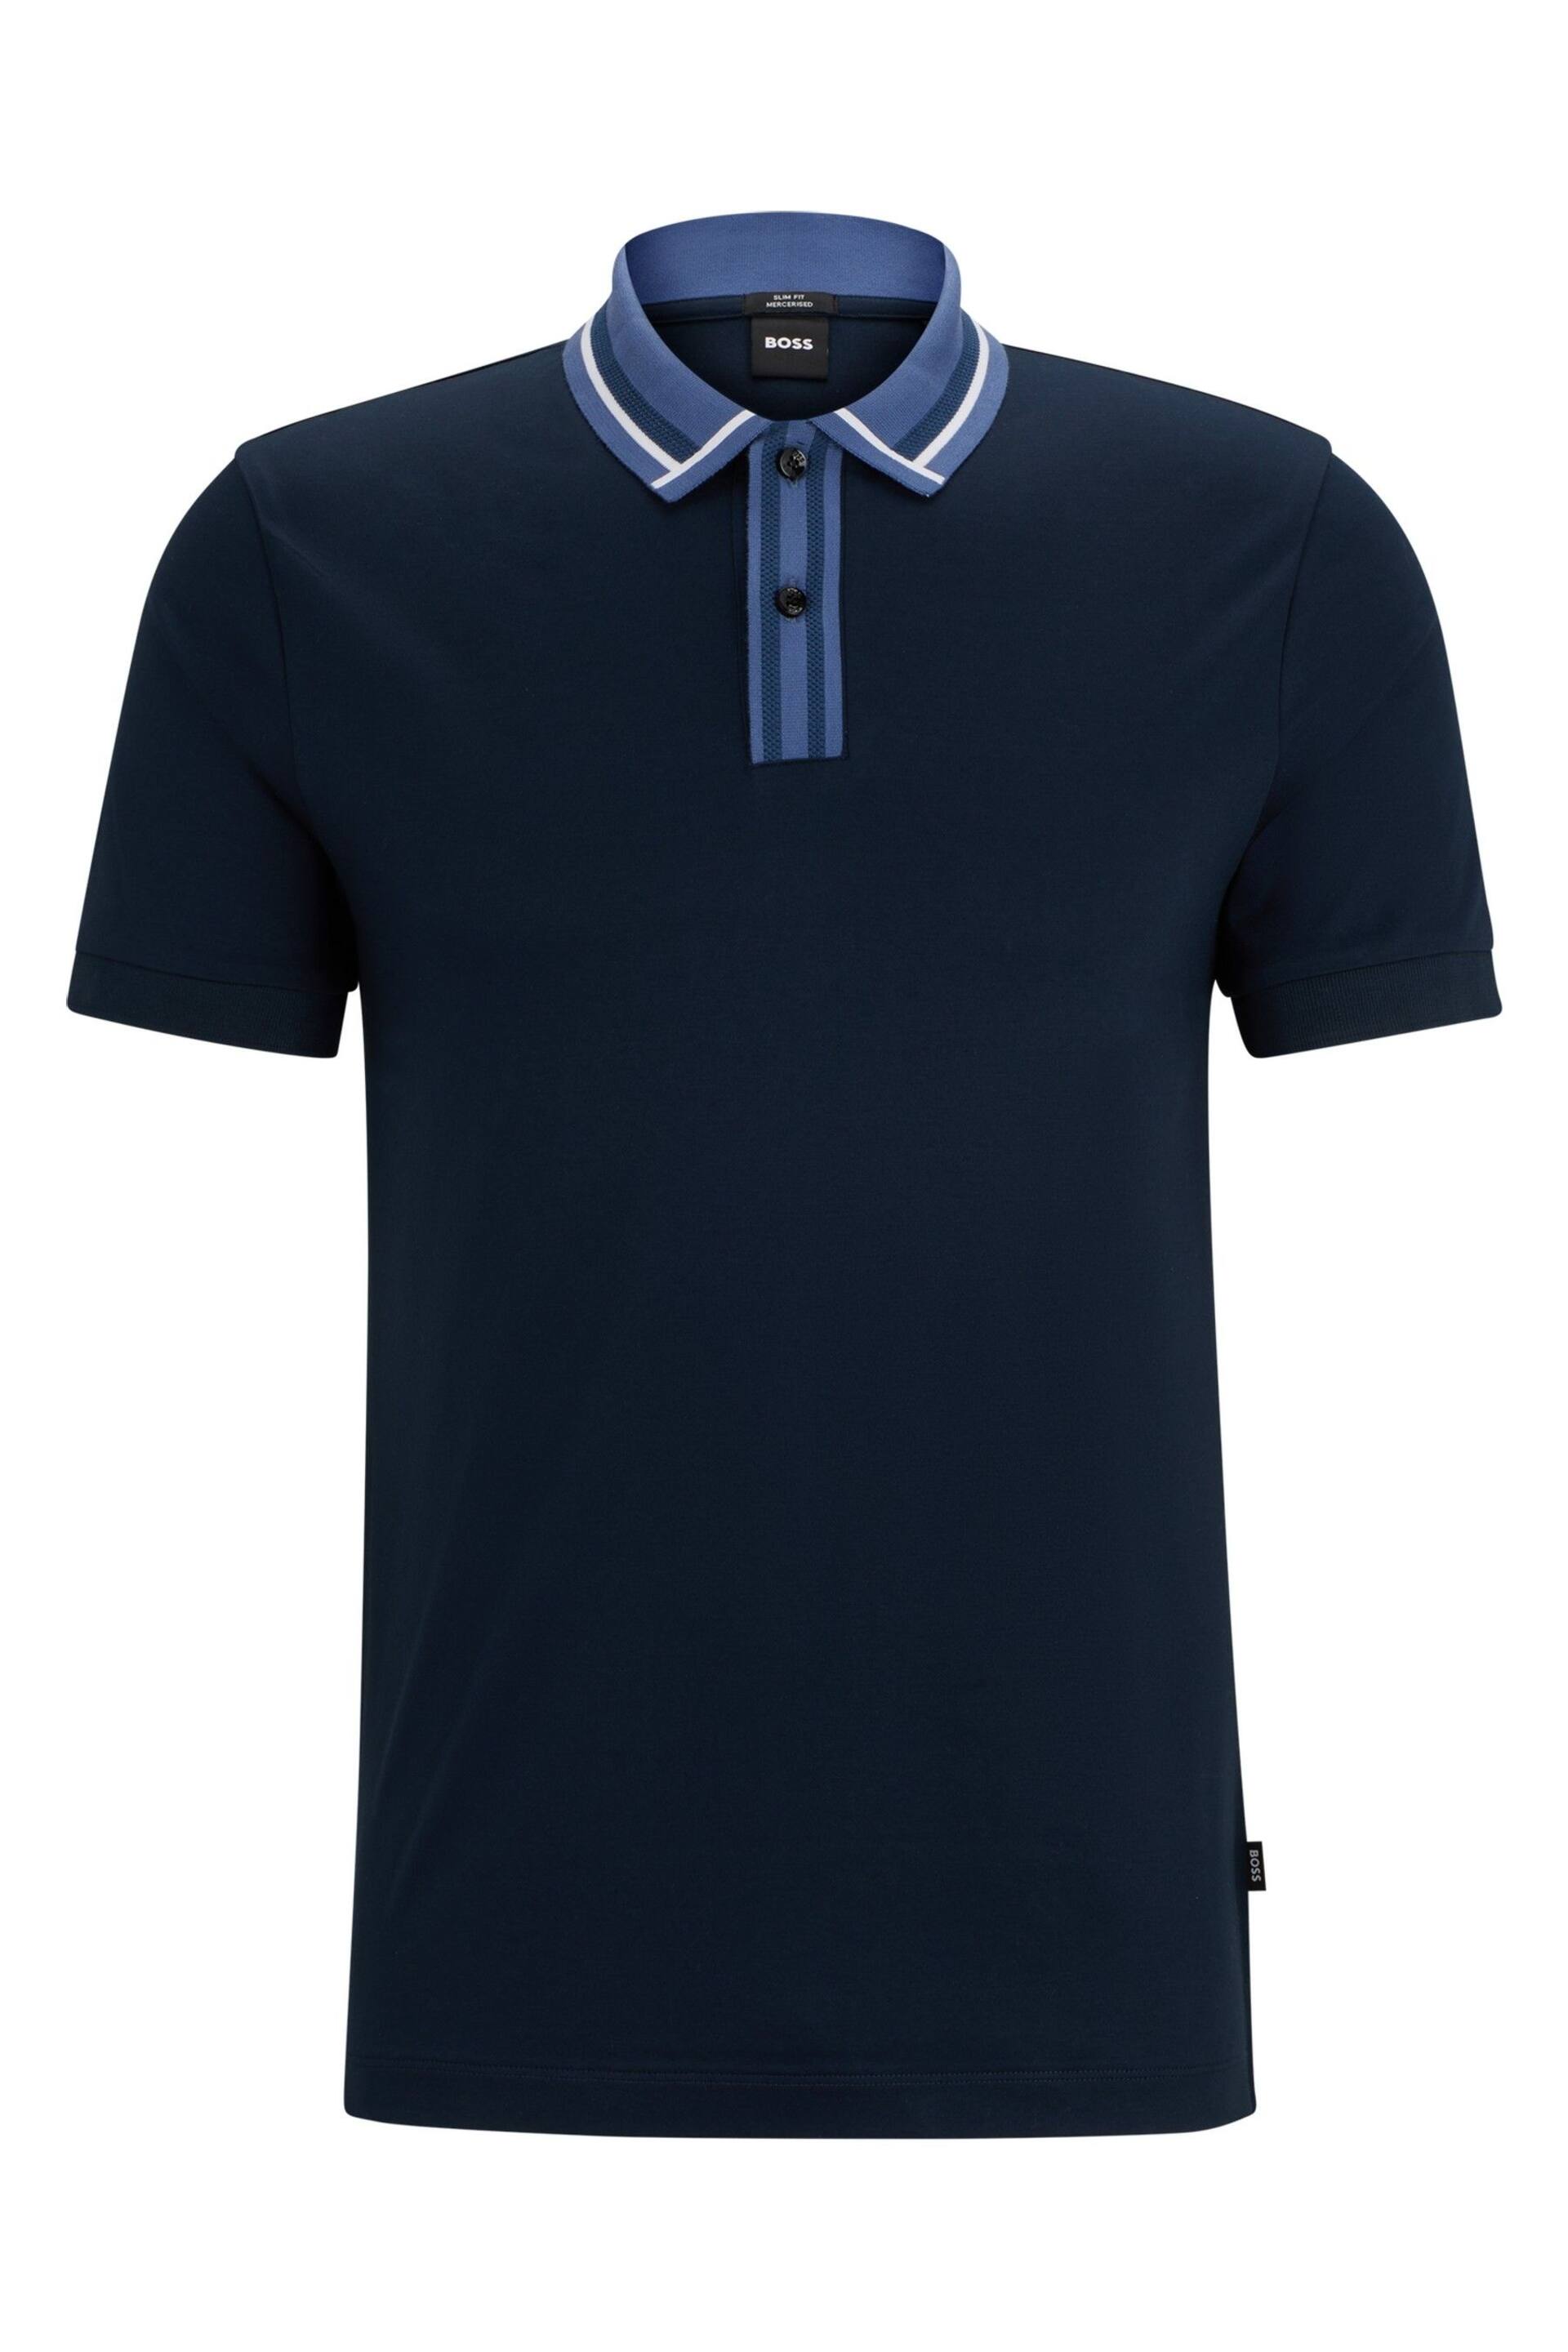 BOSS Navy Blue Contrast Collar Slim Fit Polo Shirt - Image 5 of 5